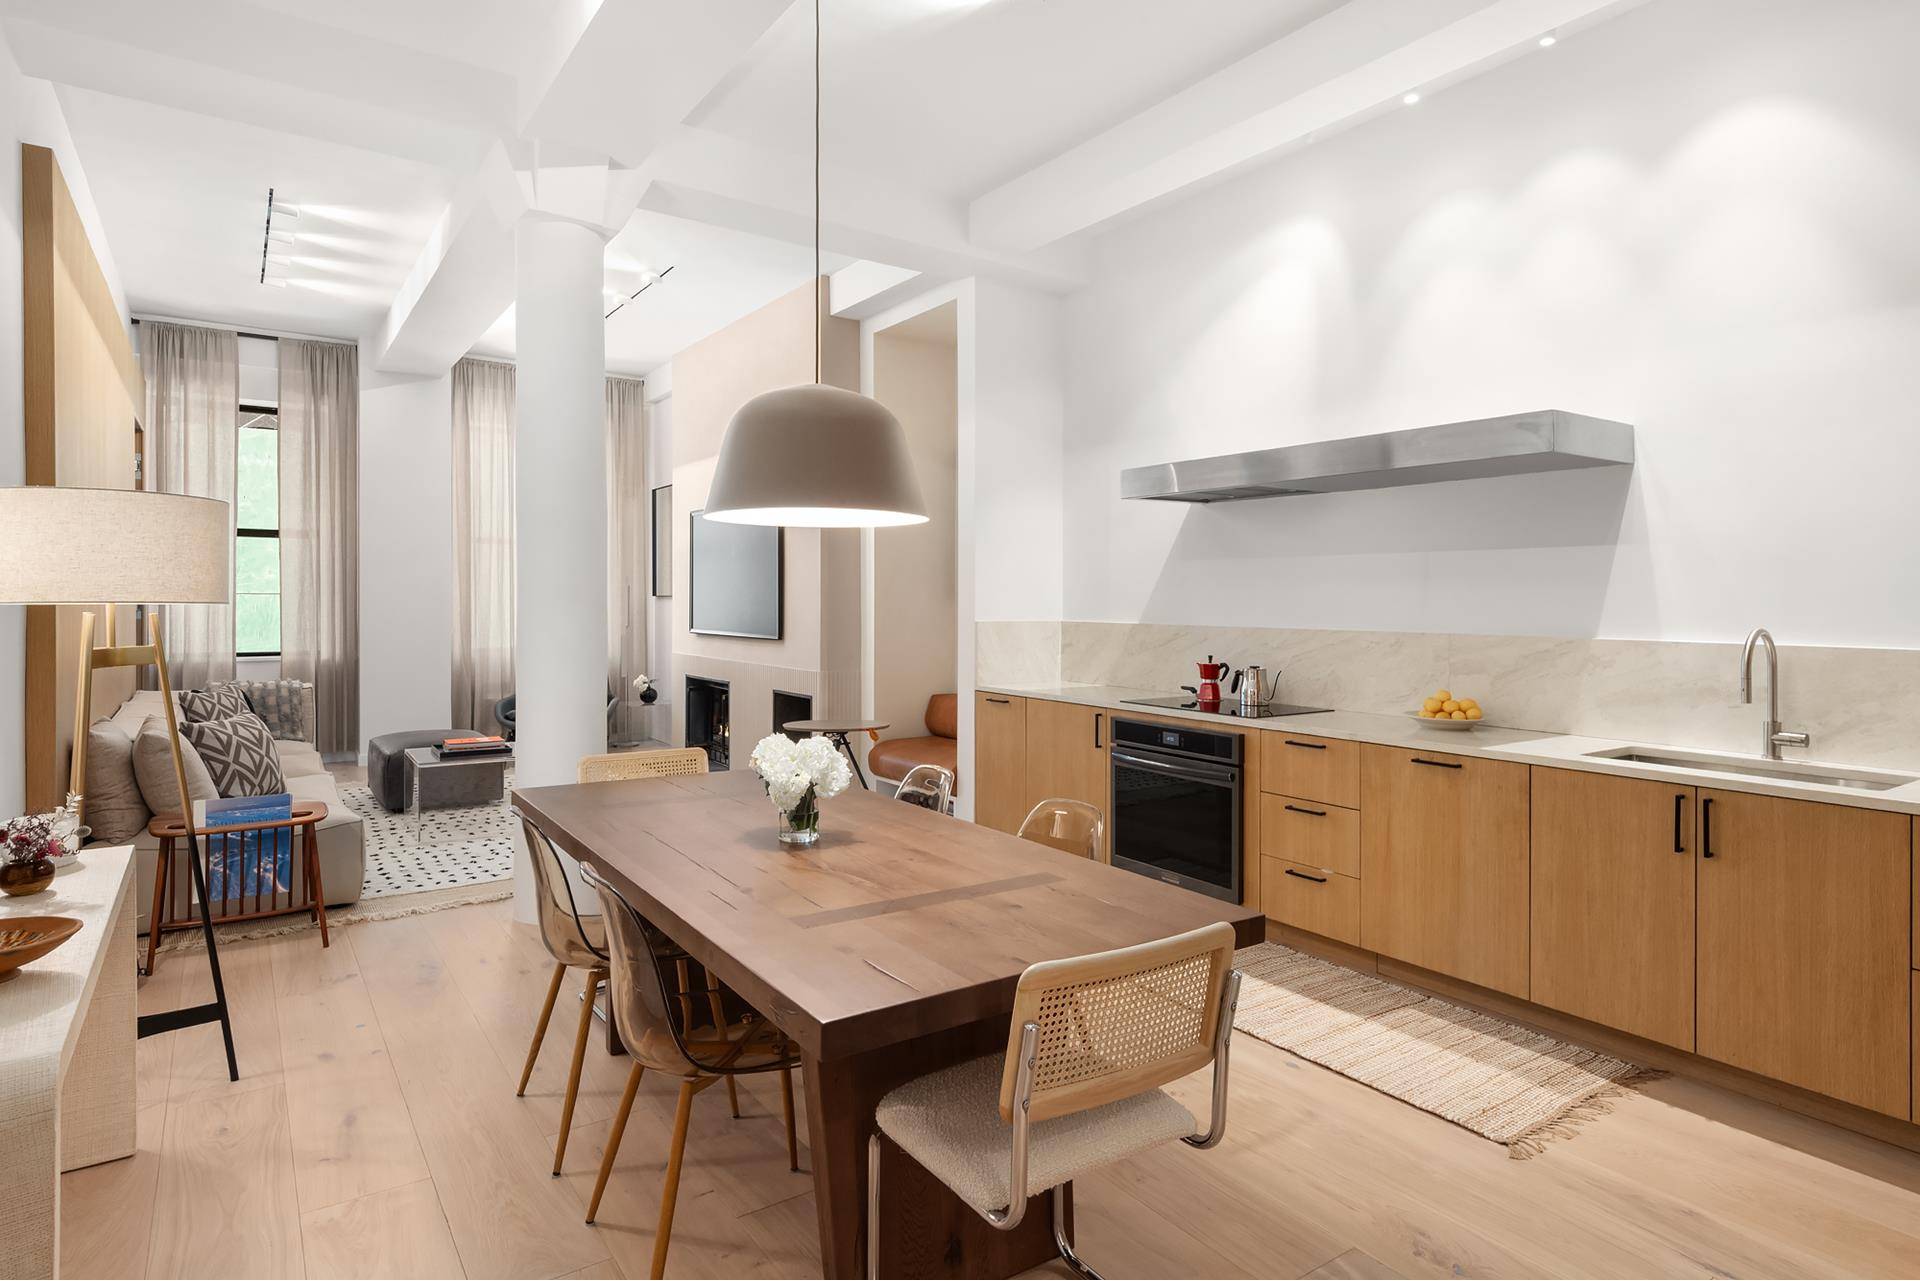 Experience the epitome of West Village living at 155 Perry Street, Apt.